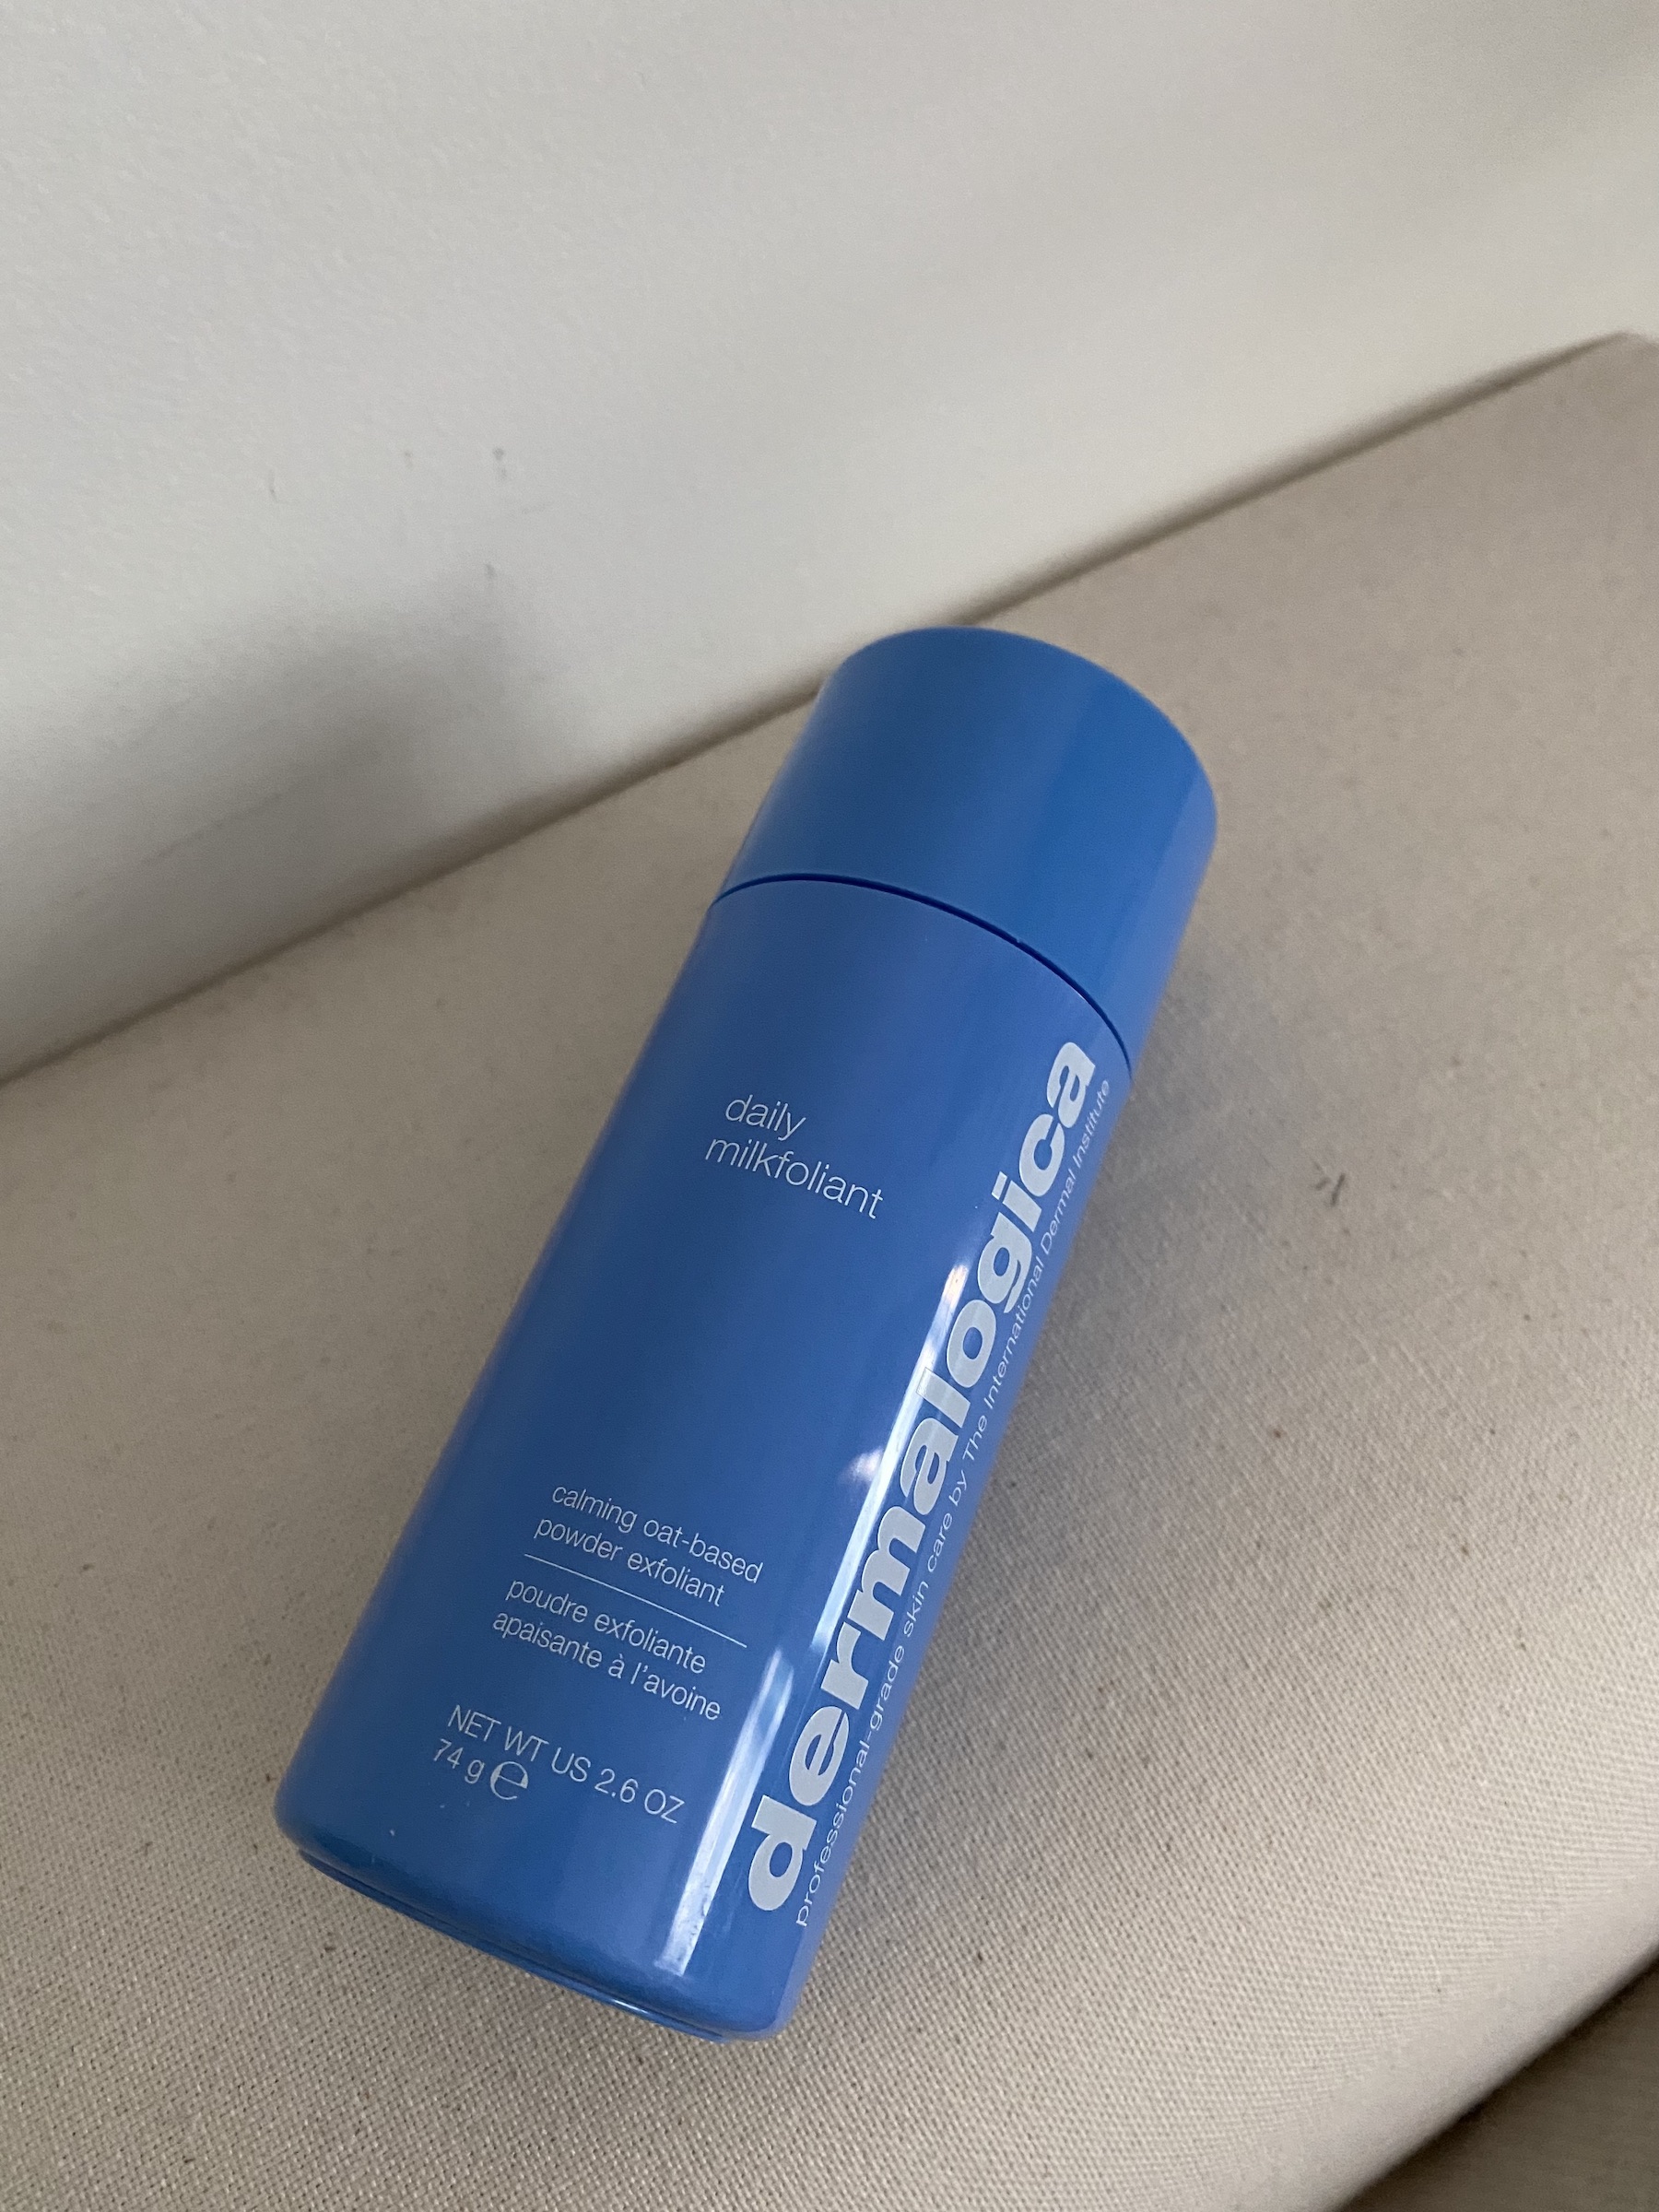 Dermalogica Daily Milkfoliant: A quick review